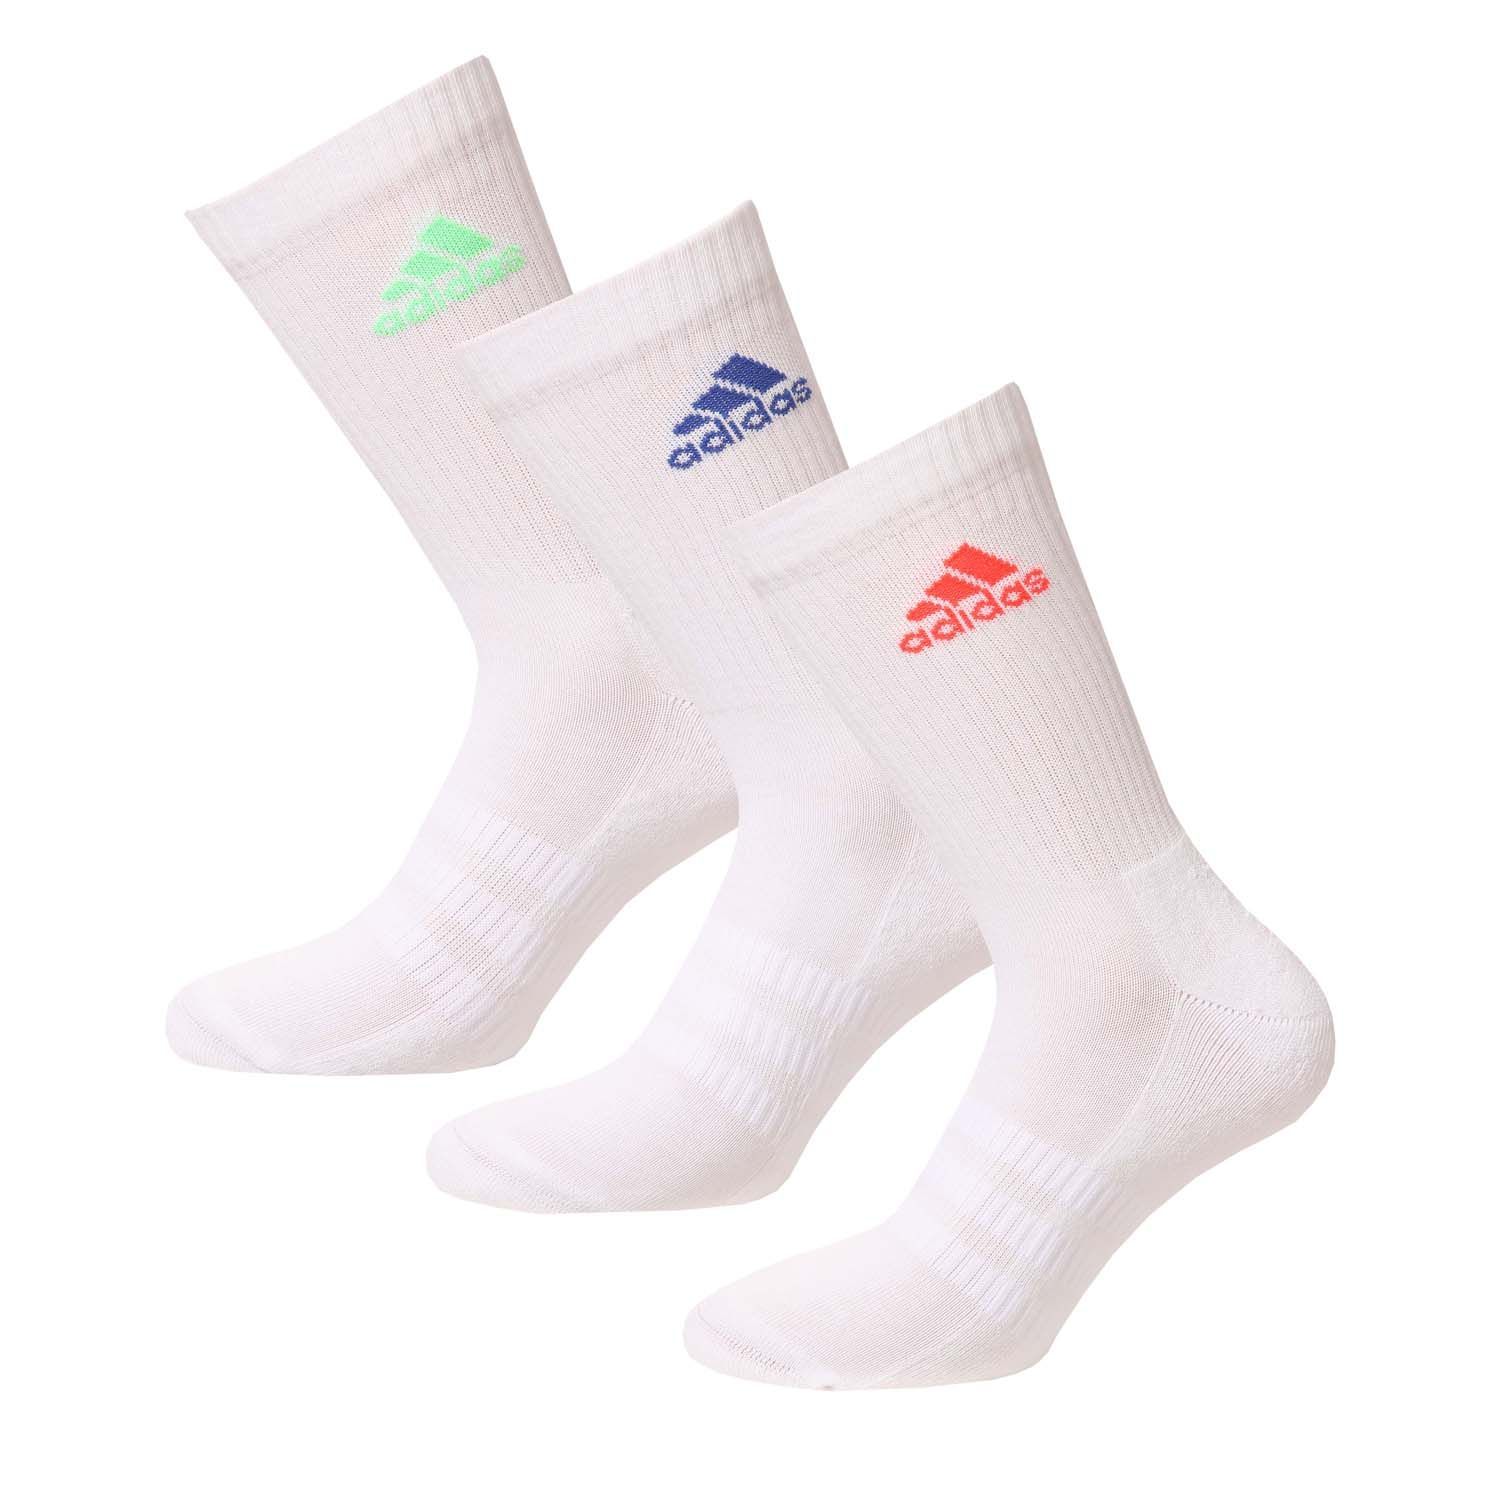 adidas 3 -Pack Cushioned Crew Socks in white.- Crew length.- Three pairs per pack.- Heel-to-toe cushioning.- Linked toe seam for a smooth feel.- Arch support.- Sock umbrella.- adidas branding.- 56% Cotton - 41% Polyester - 3% Elastane. Machine washable.- Ref: H27749